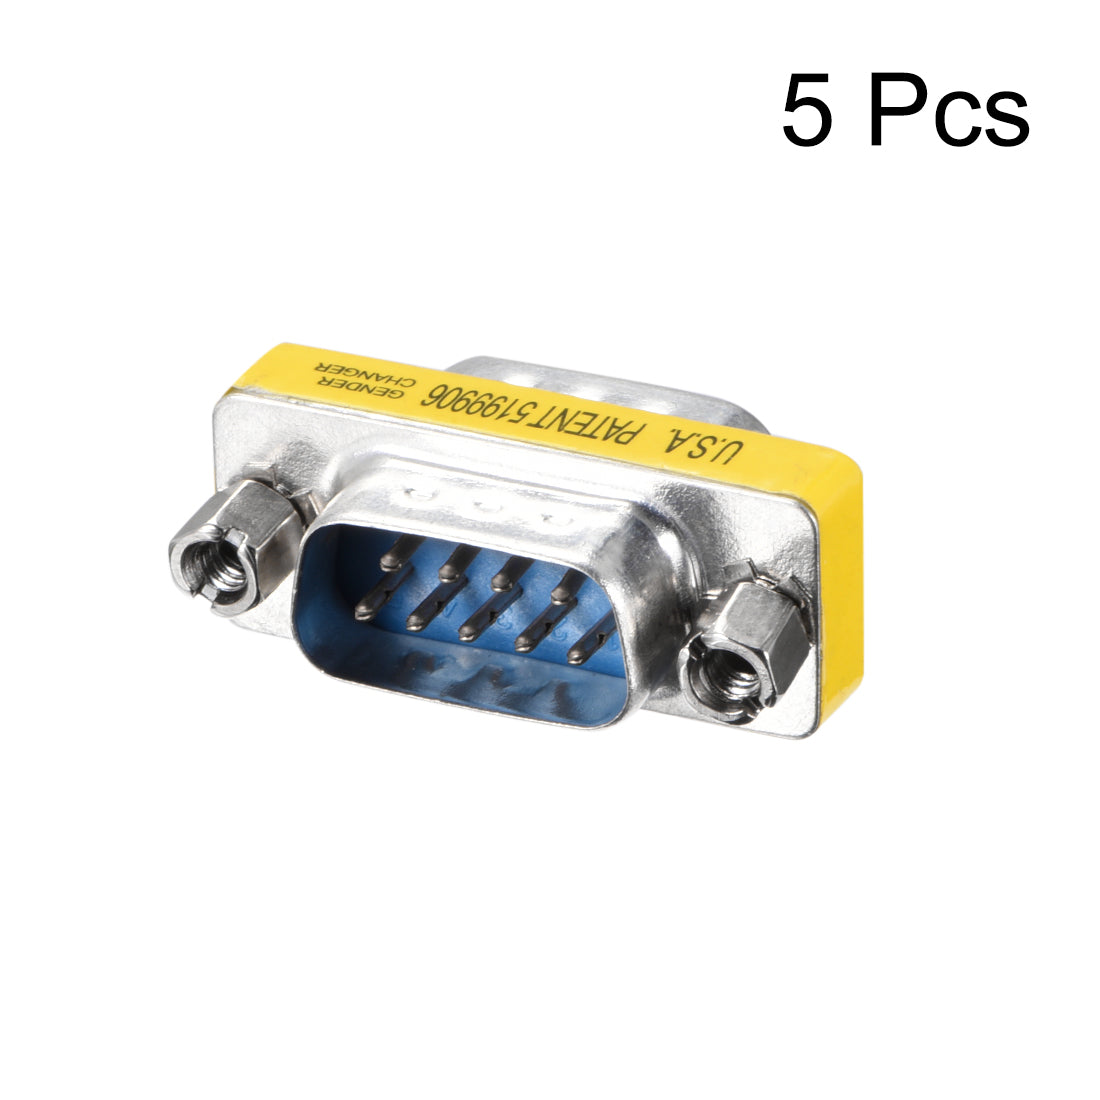 uxcell Uxcell DB9 VGA Gender Changer 9 Pin Male to Male 2-row Mini Gender Changer Coupler Adapter Connector for Serial Applications Blue 5pcs